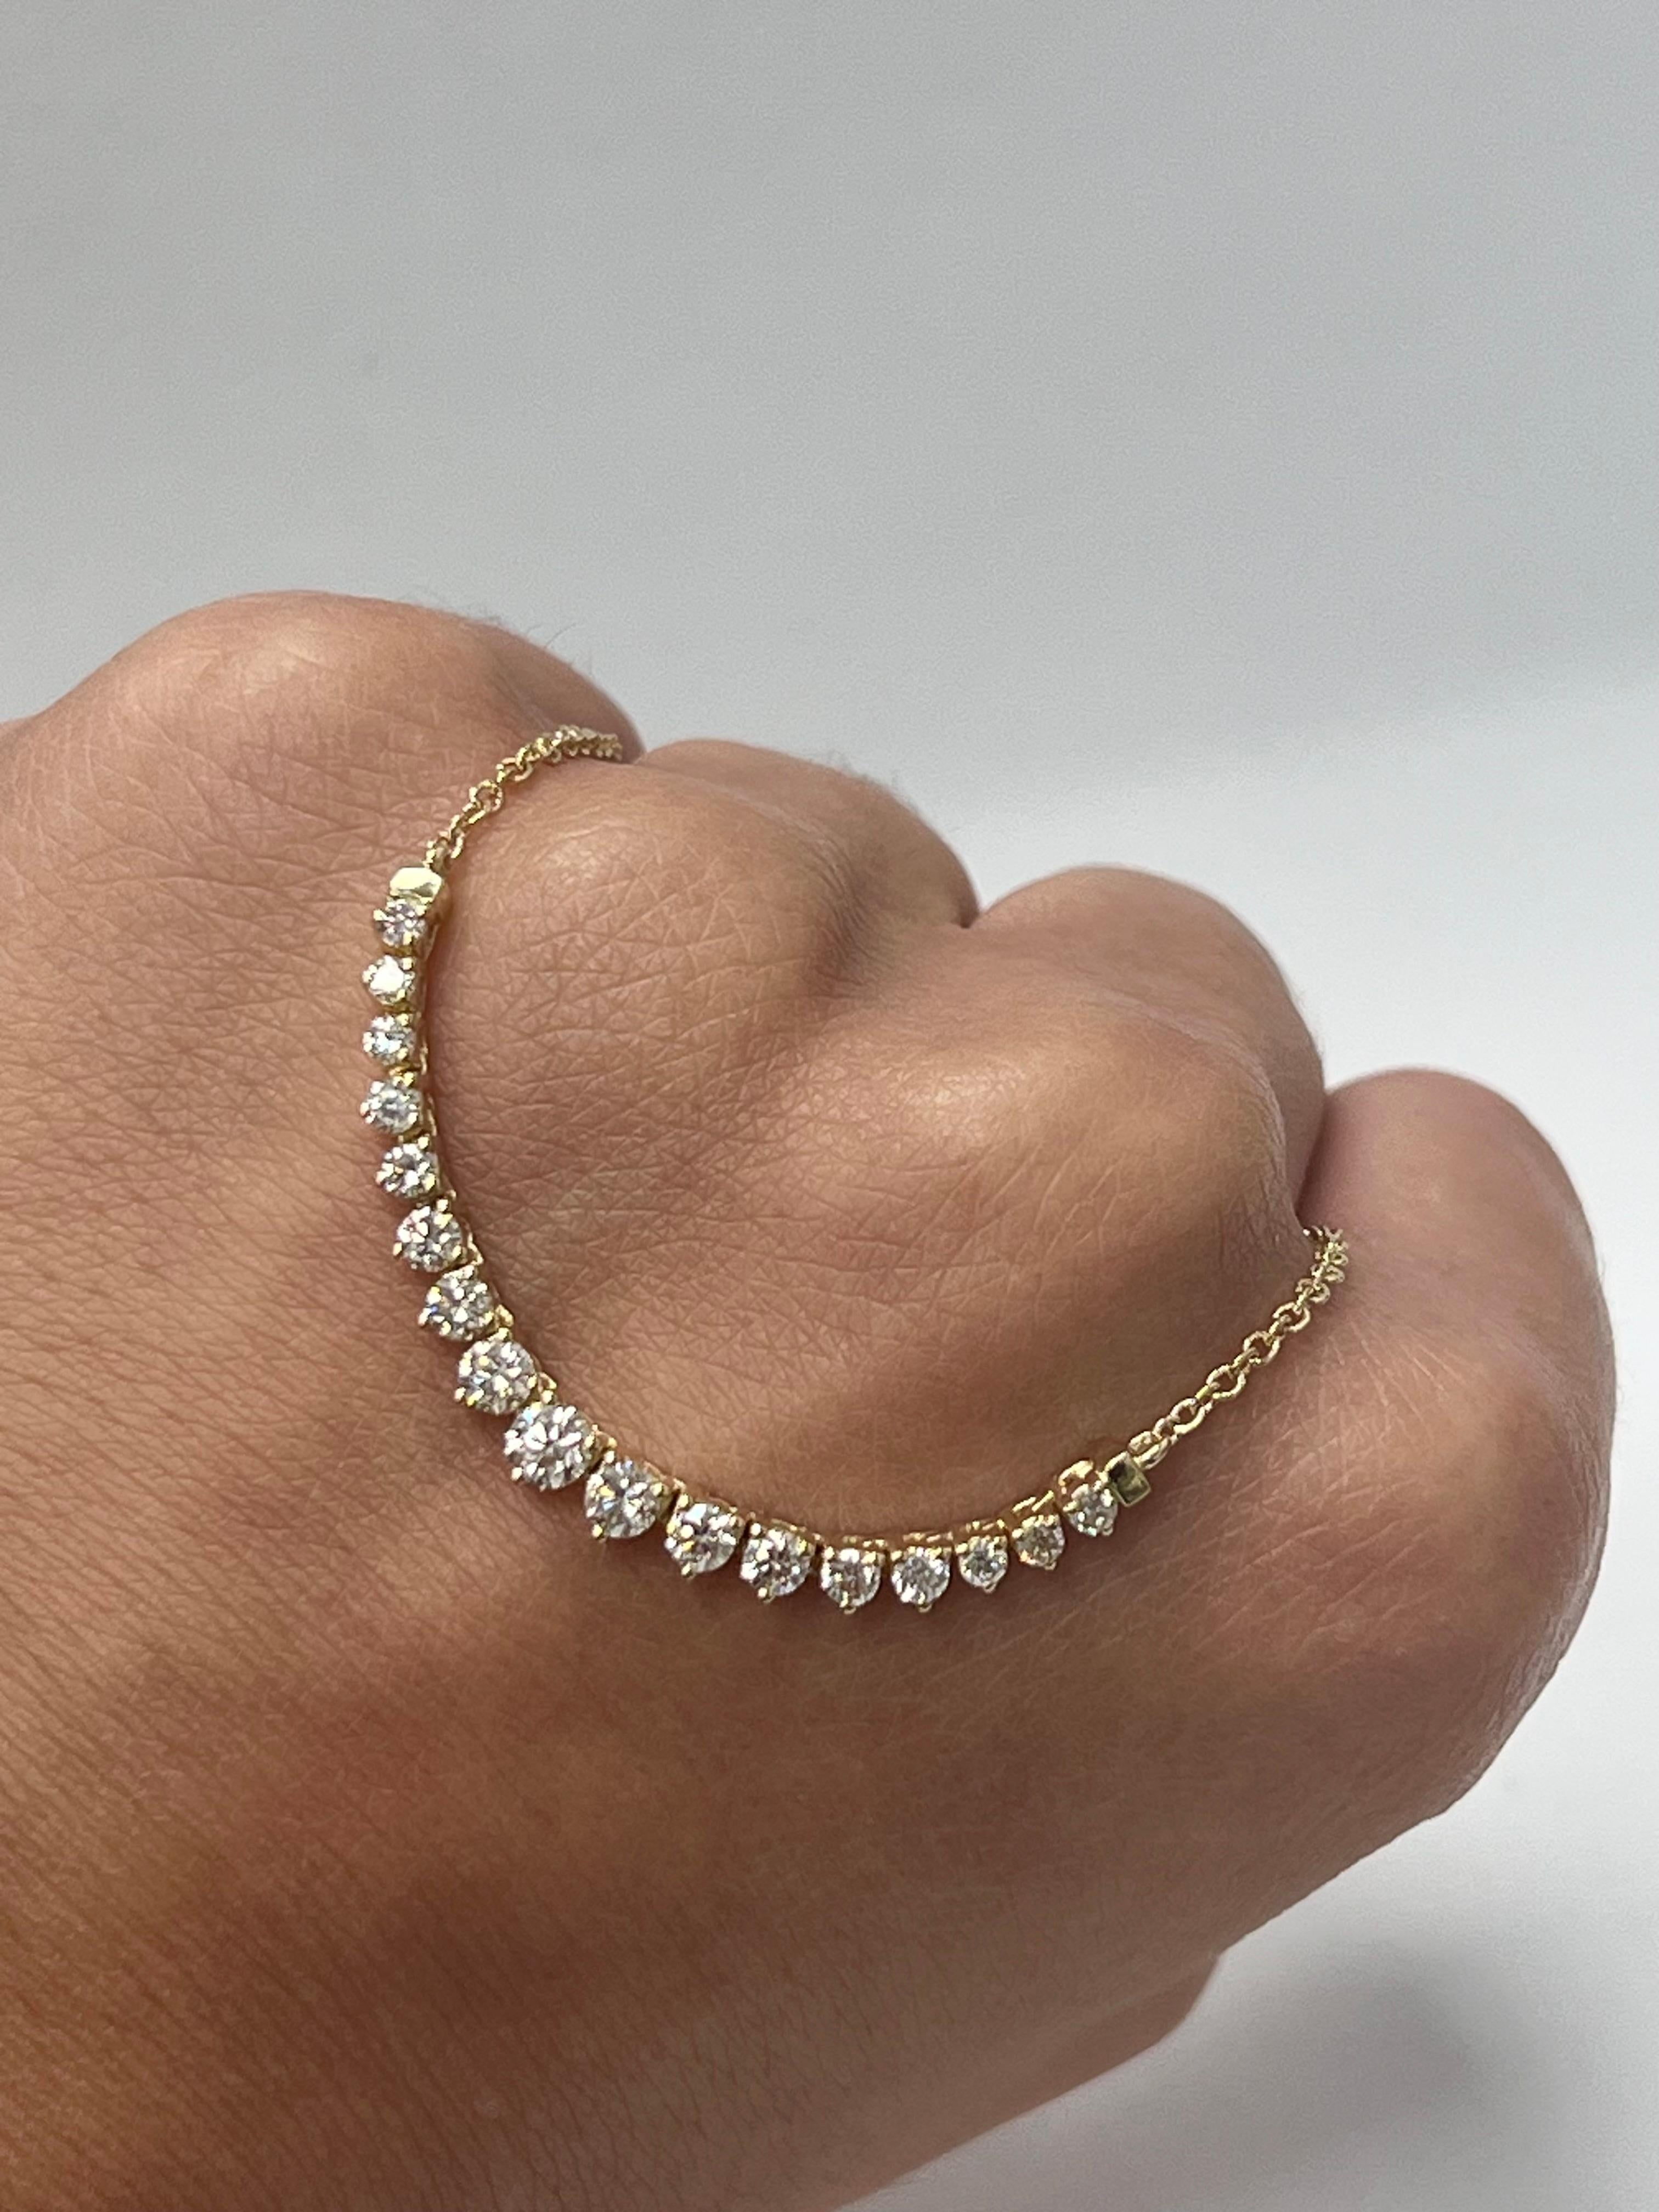 With this exquisite single-row yellow gold diamond necklace, style and glamour are in the spotlight. This 14-karat necklace is made from a total of 17 round diamonds totaling2.0 carats, all in SI1-SI2, GH color. This classic look is timeless and is